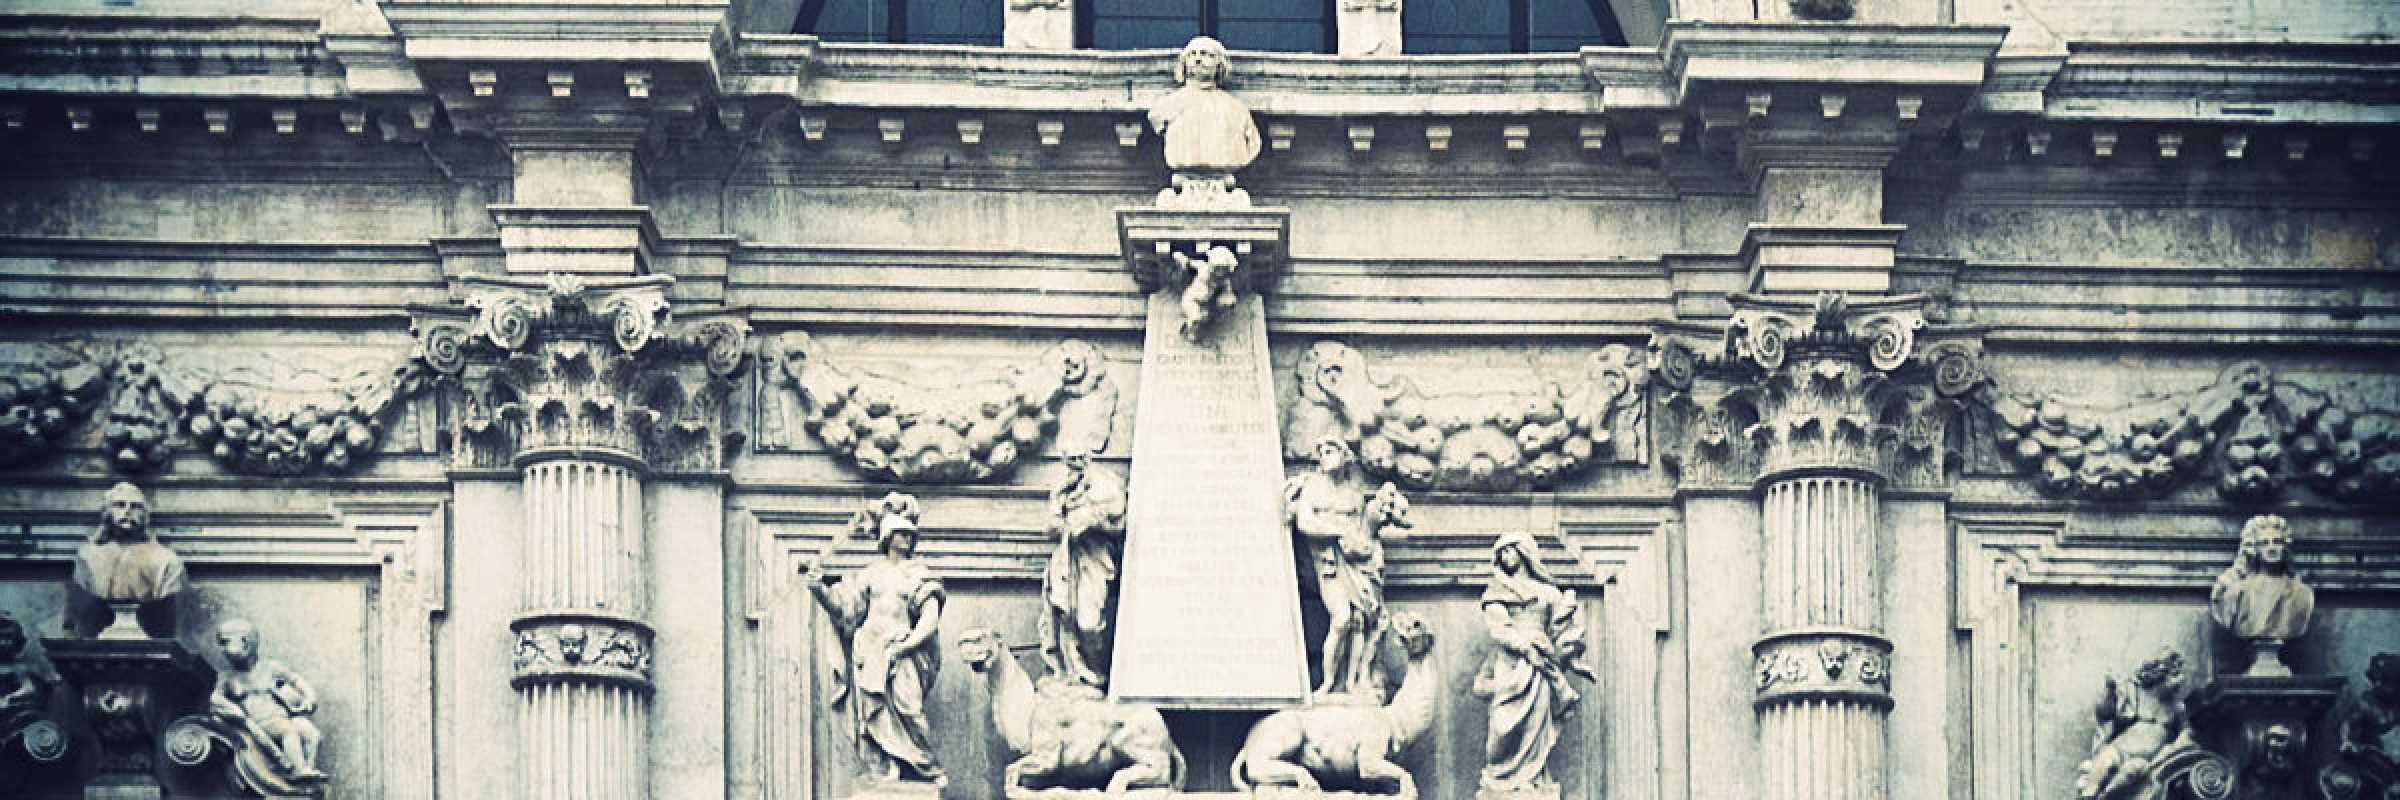 The bust of Vincenzo Fini can be found in the central part of the facade on top of an oblisque supported by camels